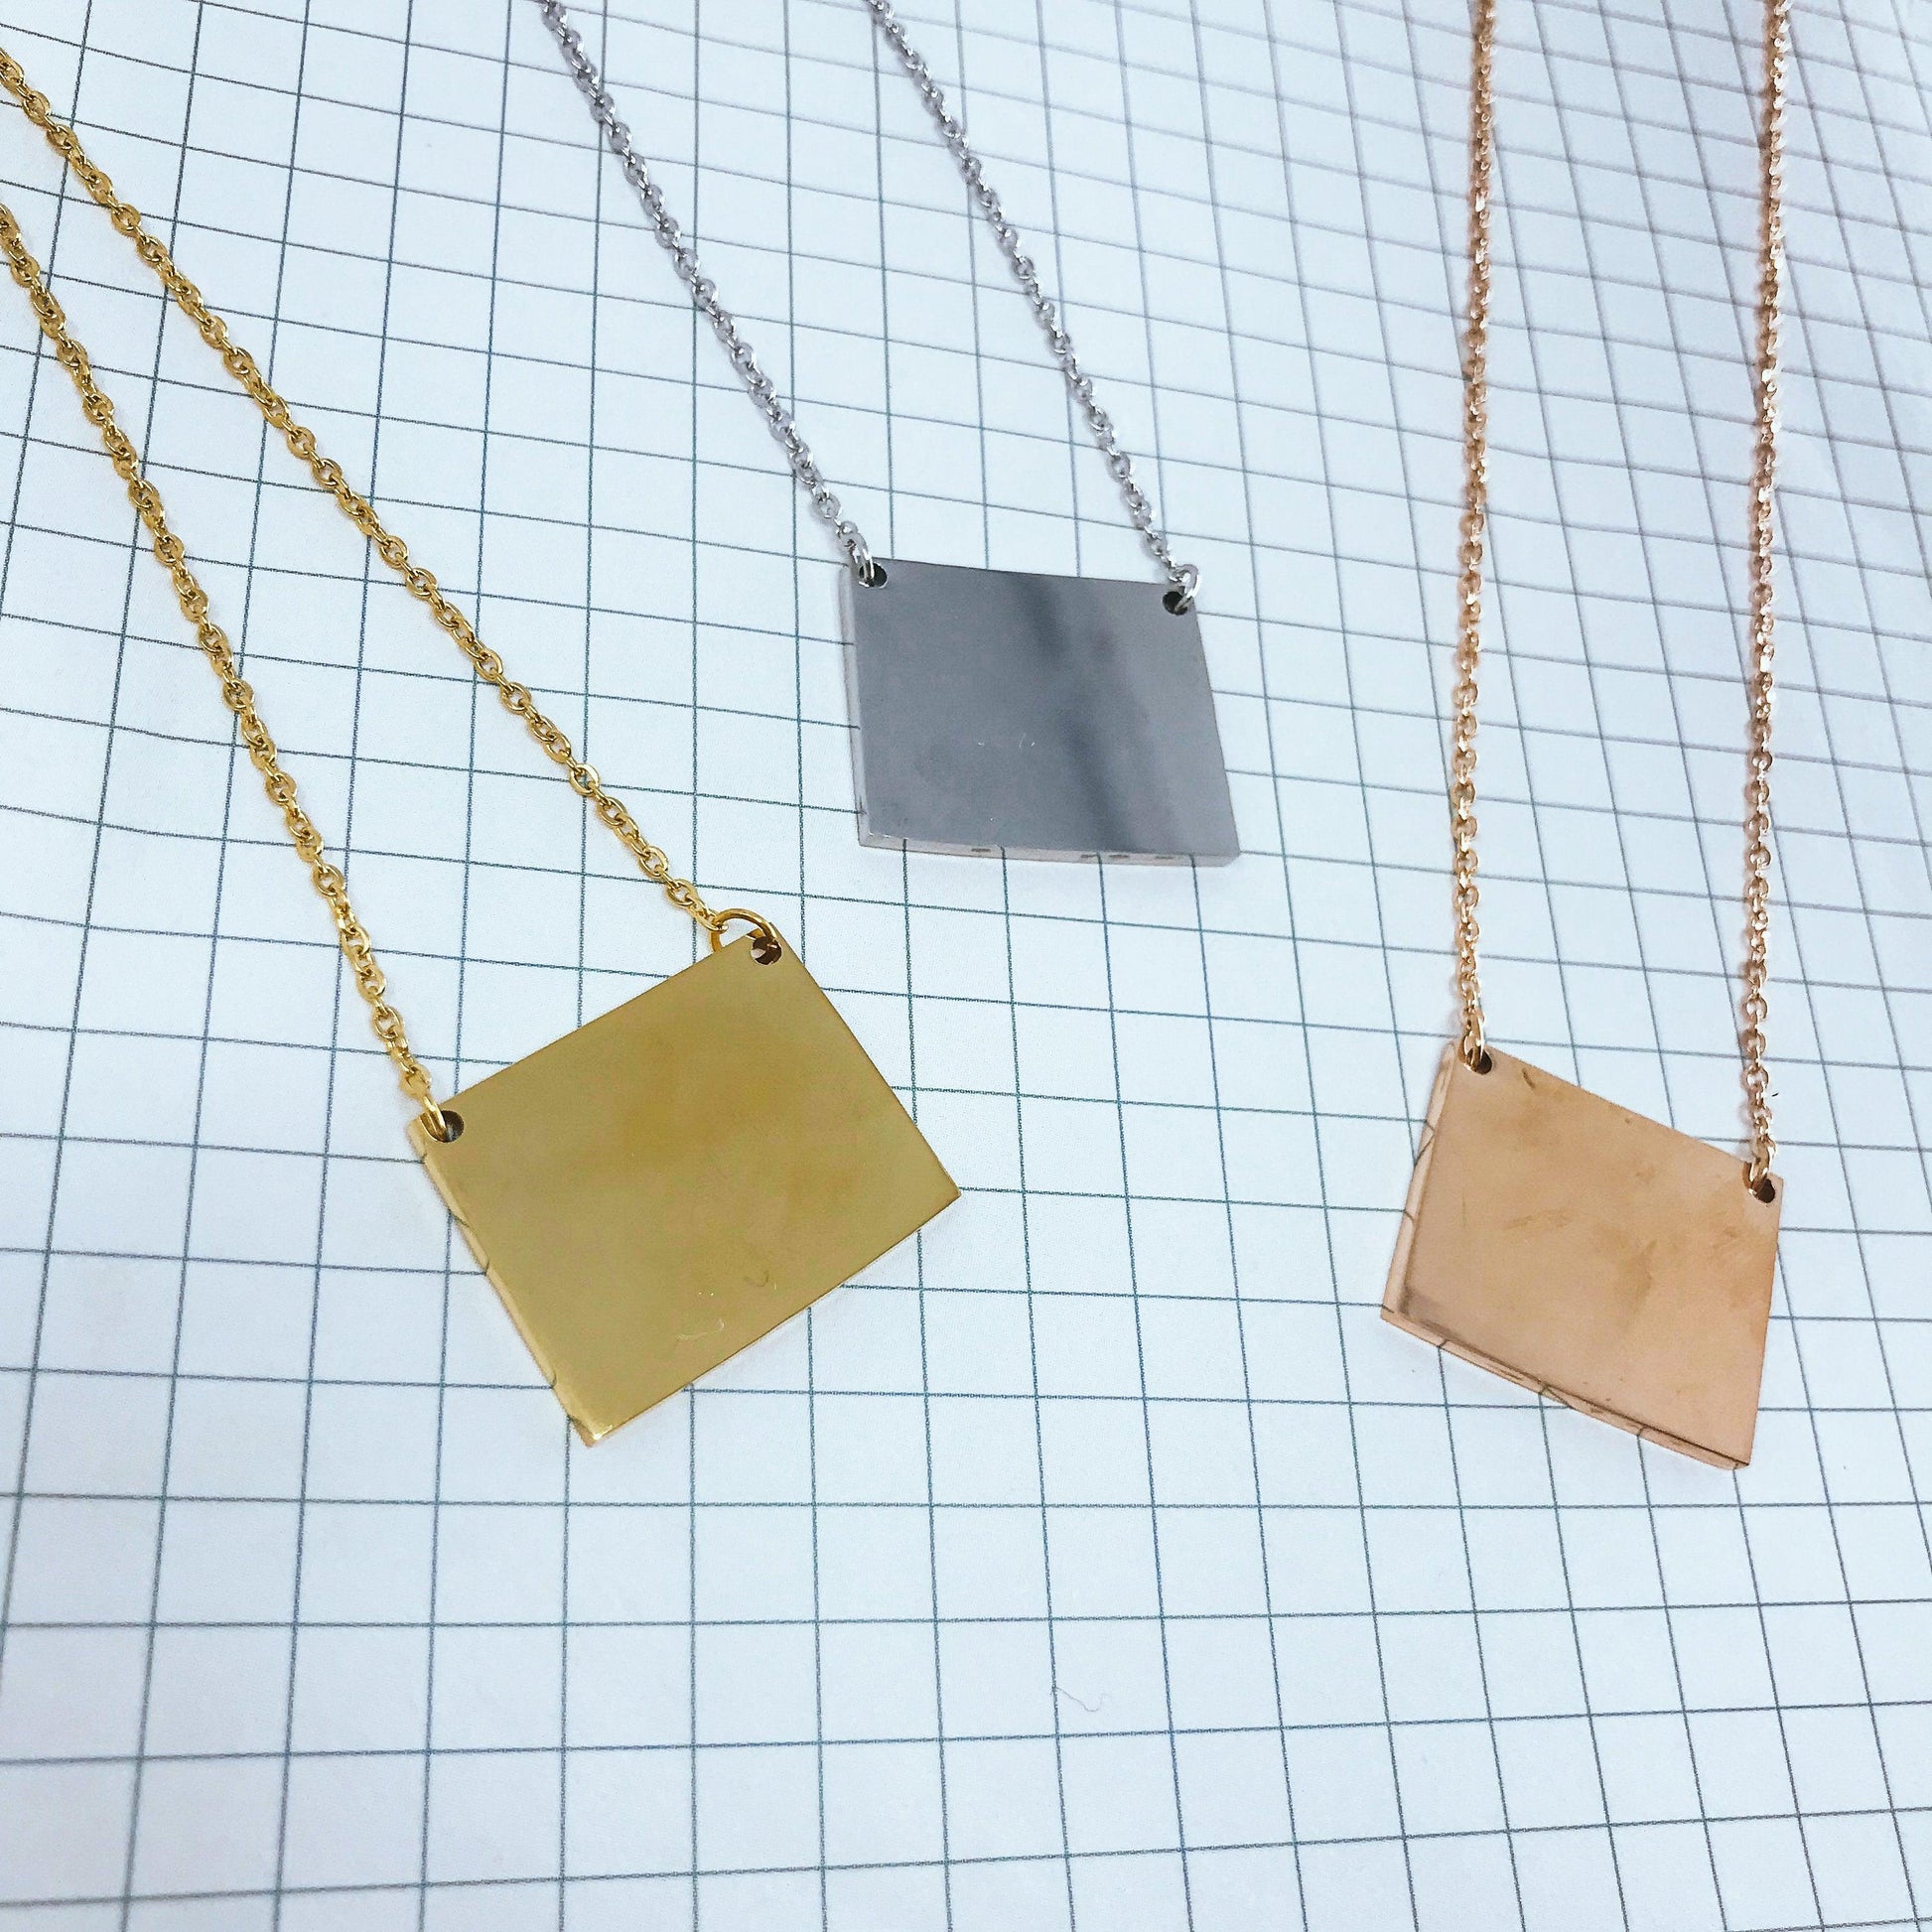 Wyoming State Silhouette Necklaces in 3 different colors: Gold, Silver & Rose Gold